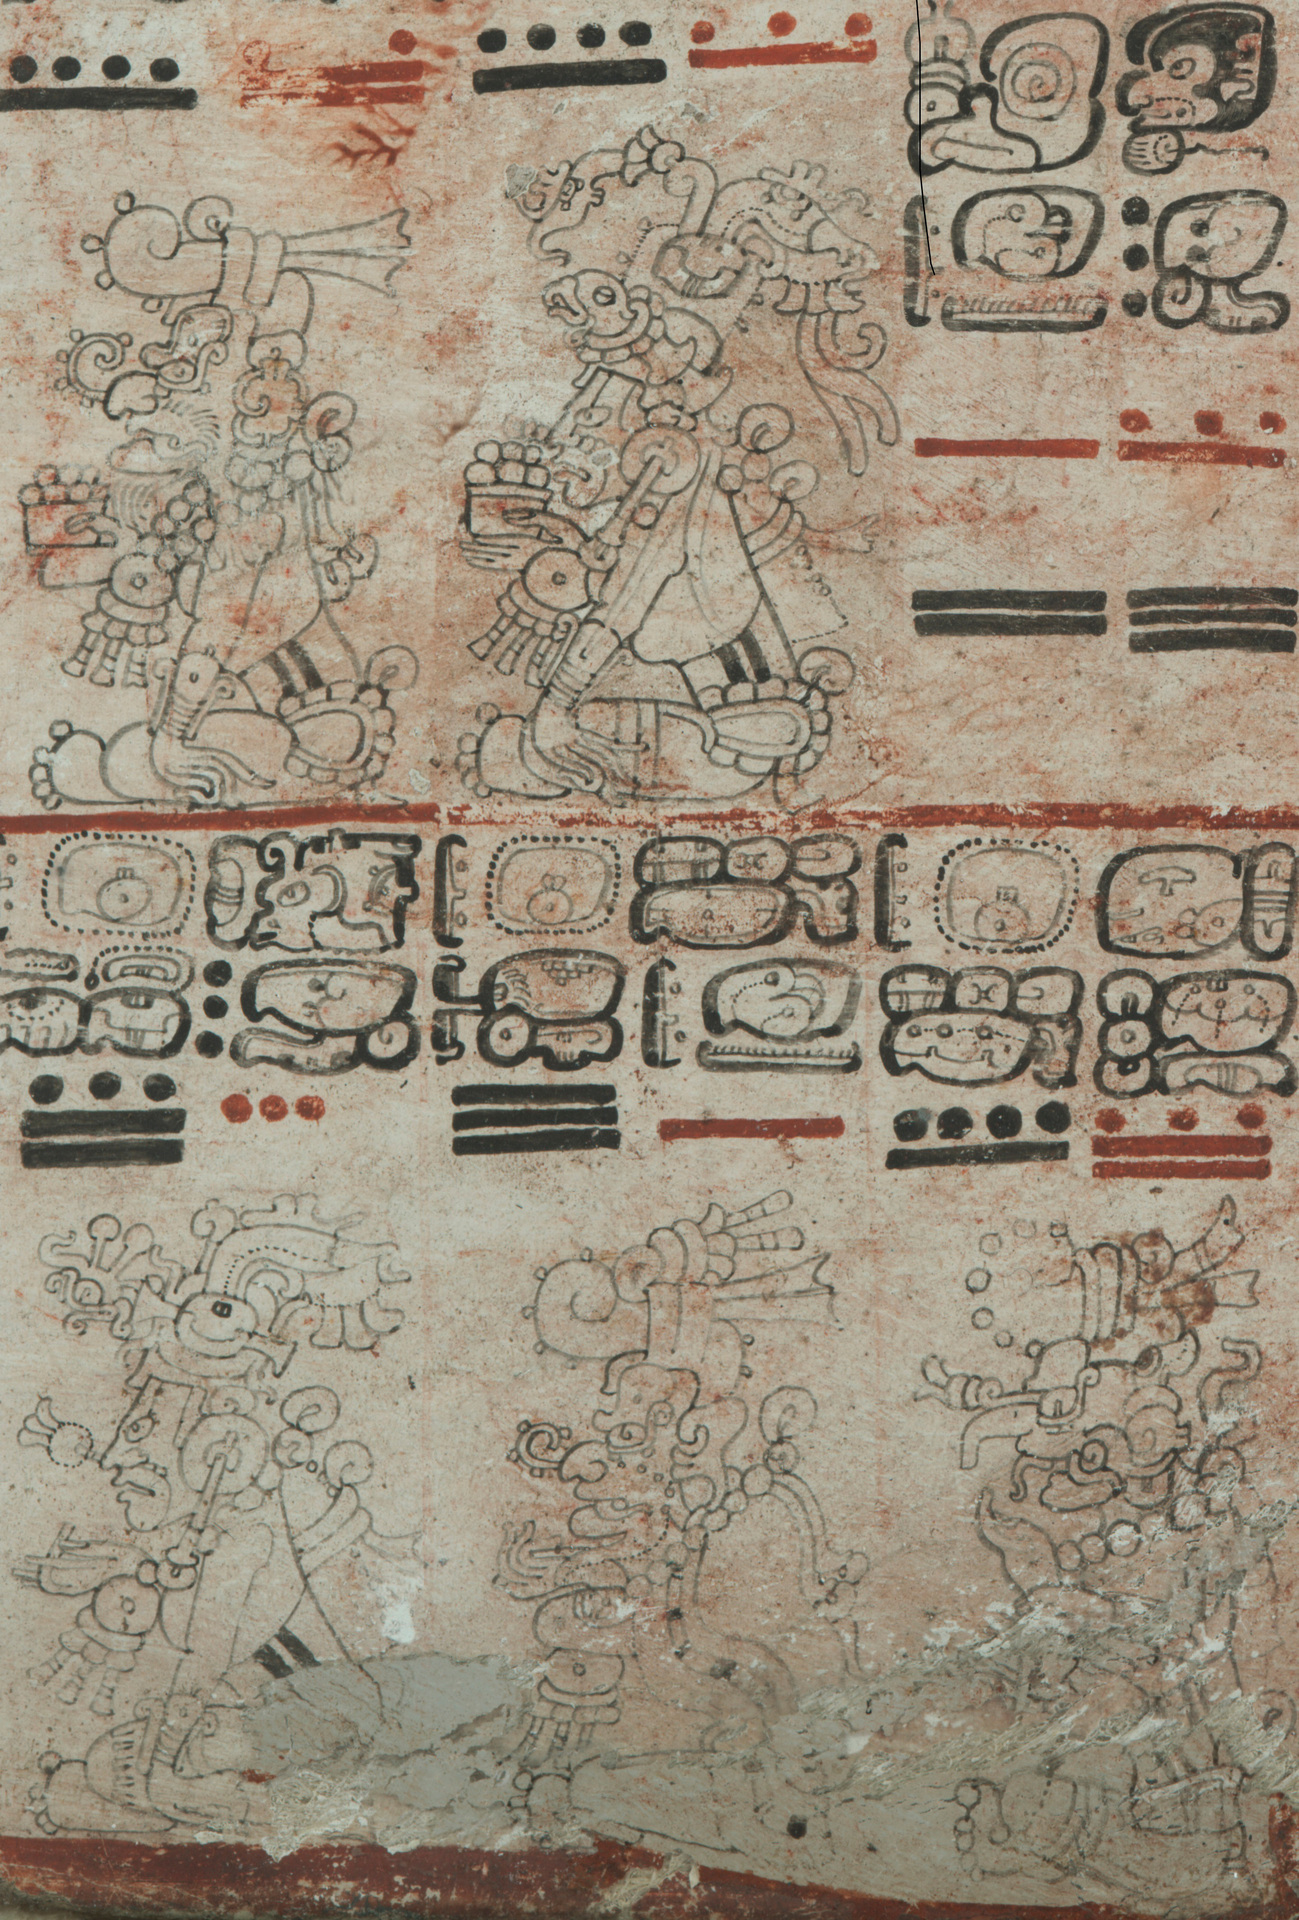 Codex Dresdensis, S. 11: Wahrsagerituale